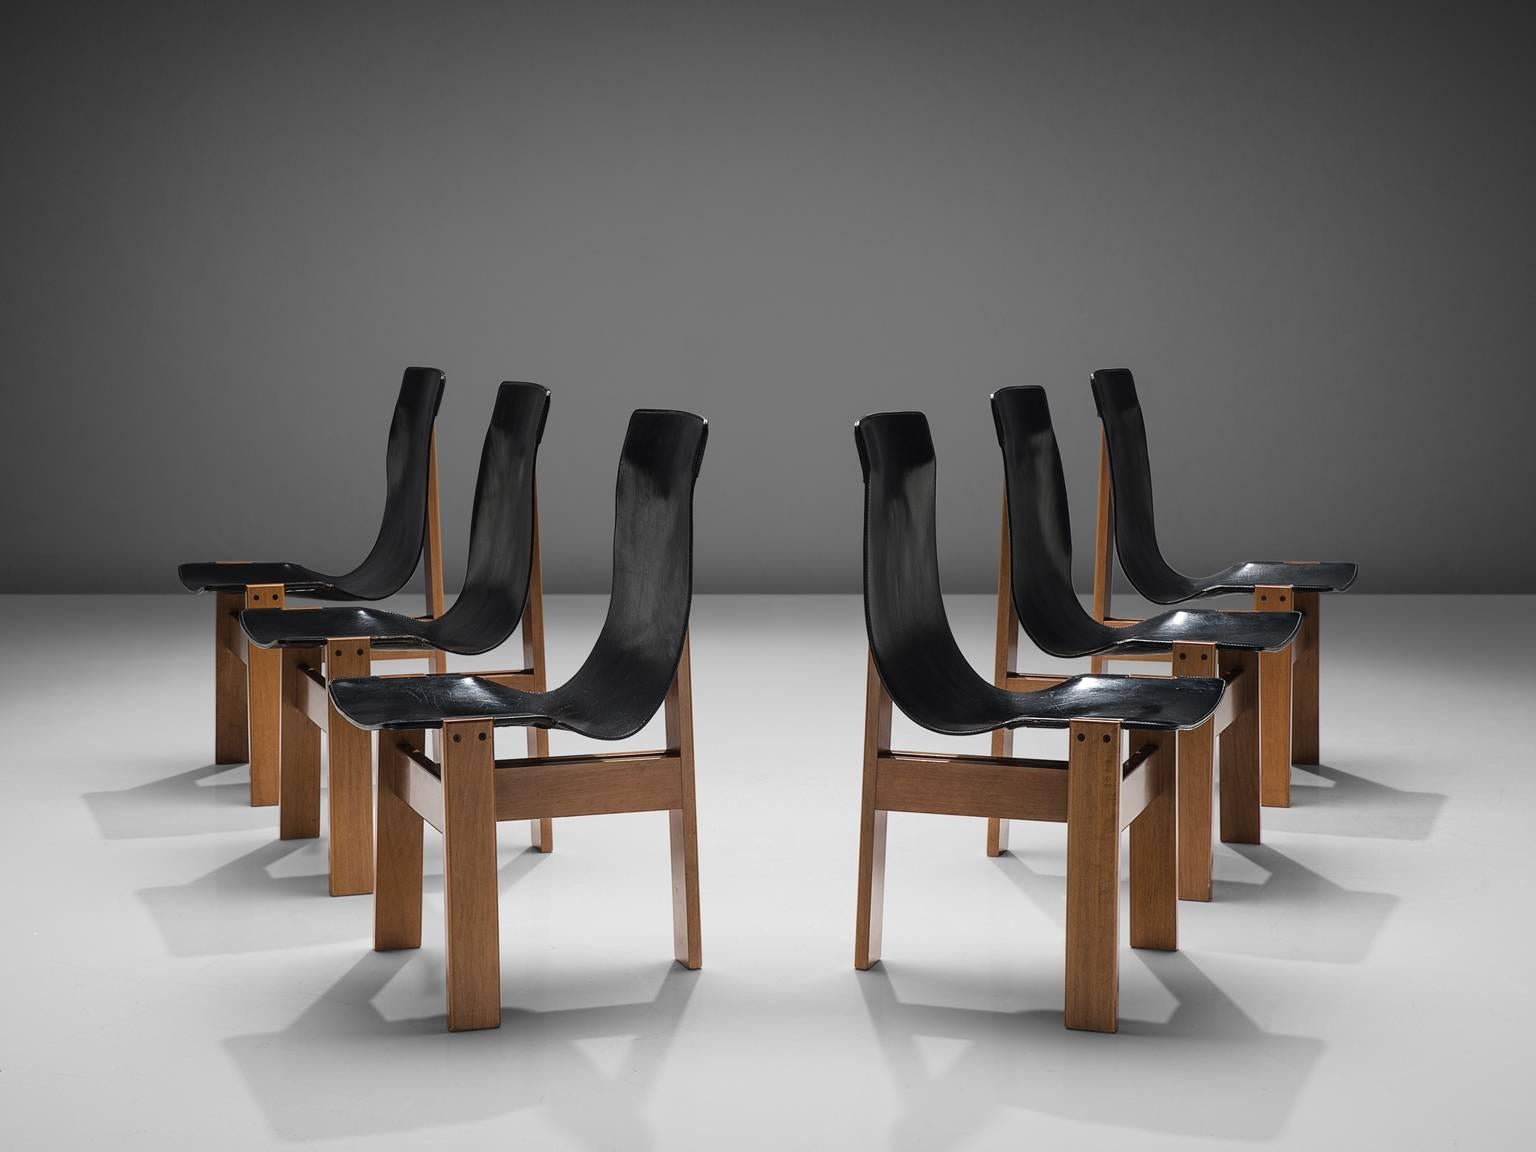 Angelo Mangiarotti for Skipper, set of eight chairs model 'Tre 3', walnut and black leather, Italy, 1978.

Interesting set of six dining chairs by Italian designer Angelo Mangiarotti. The basic frame consist of three walnut planks, combined with